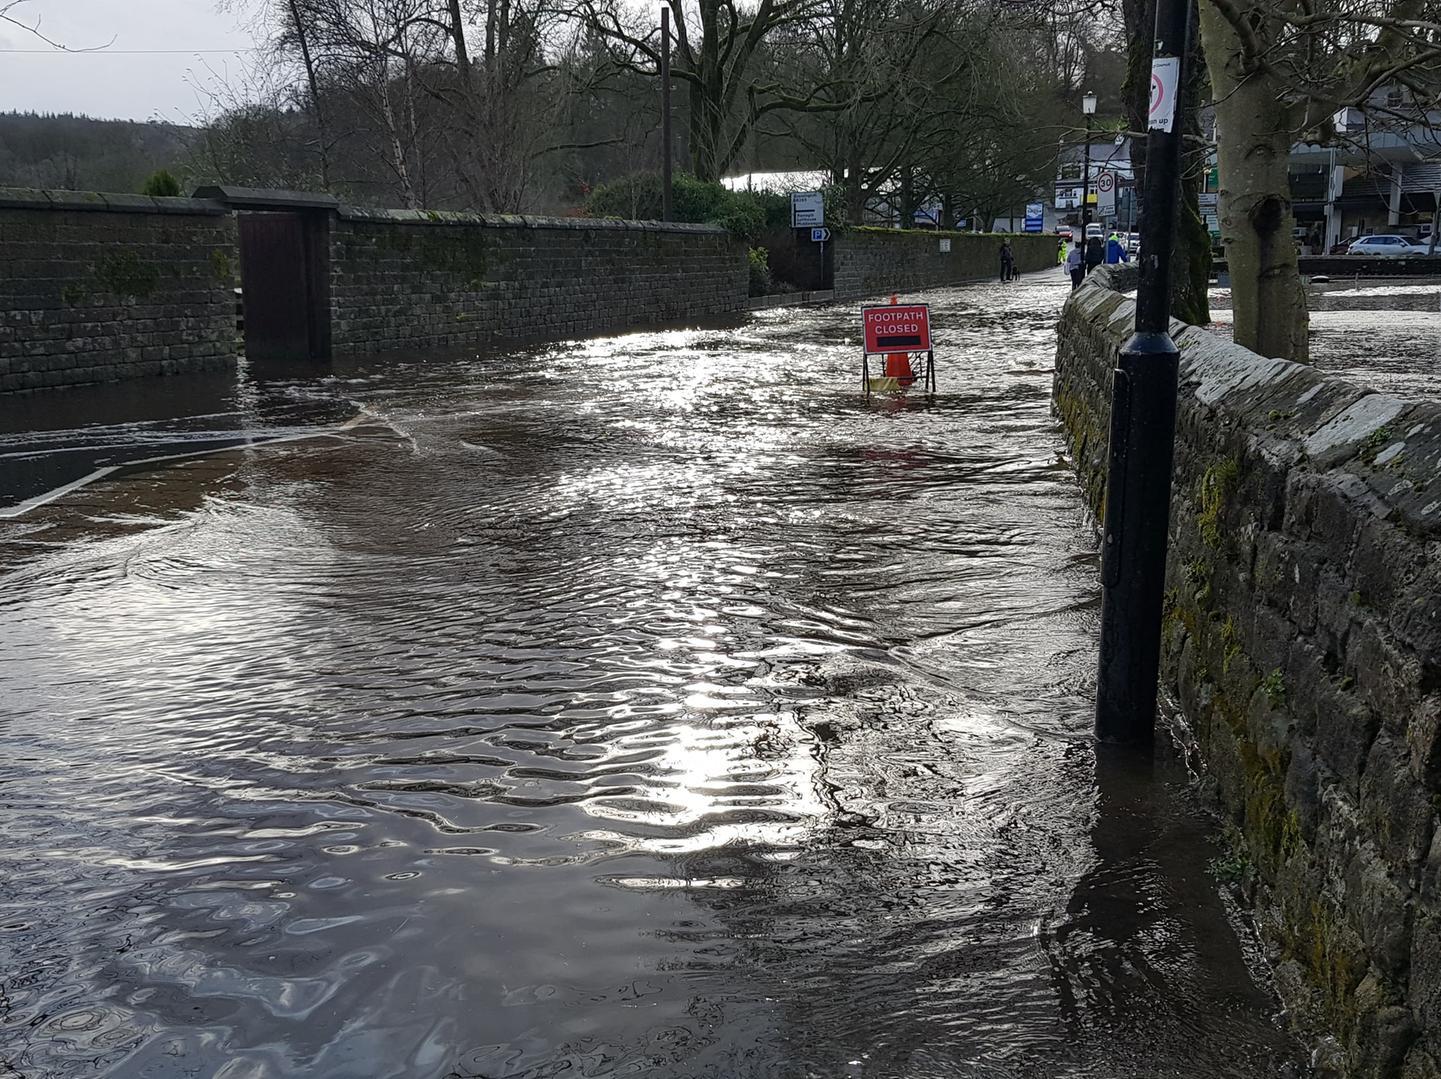 The flood water kept on rising in Pateley, but thankfully the Environment Agency has now downgraded their warning.